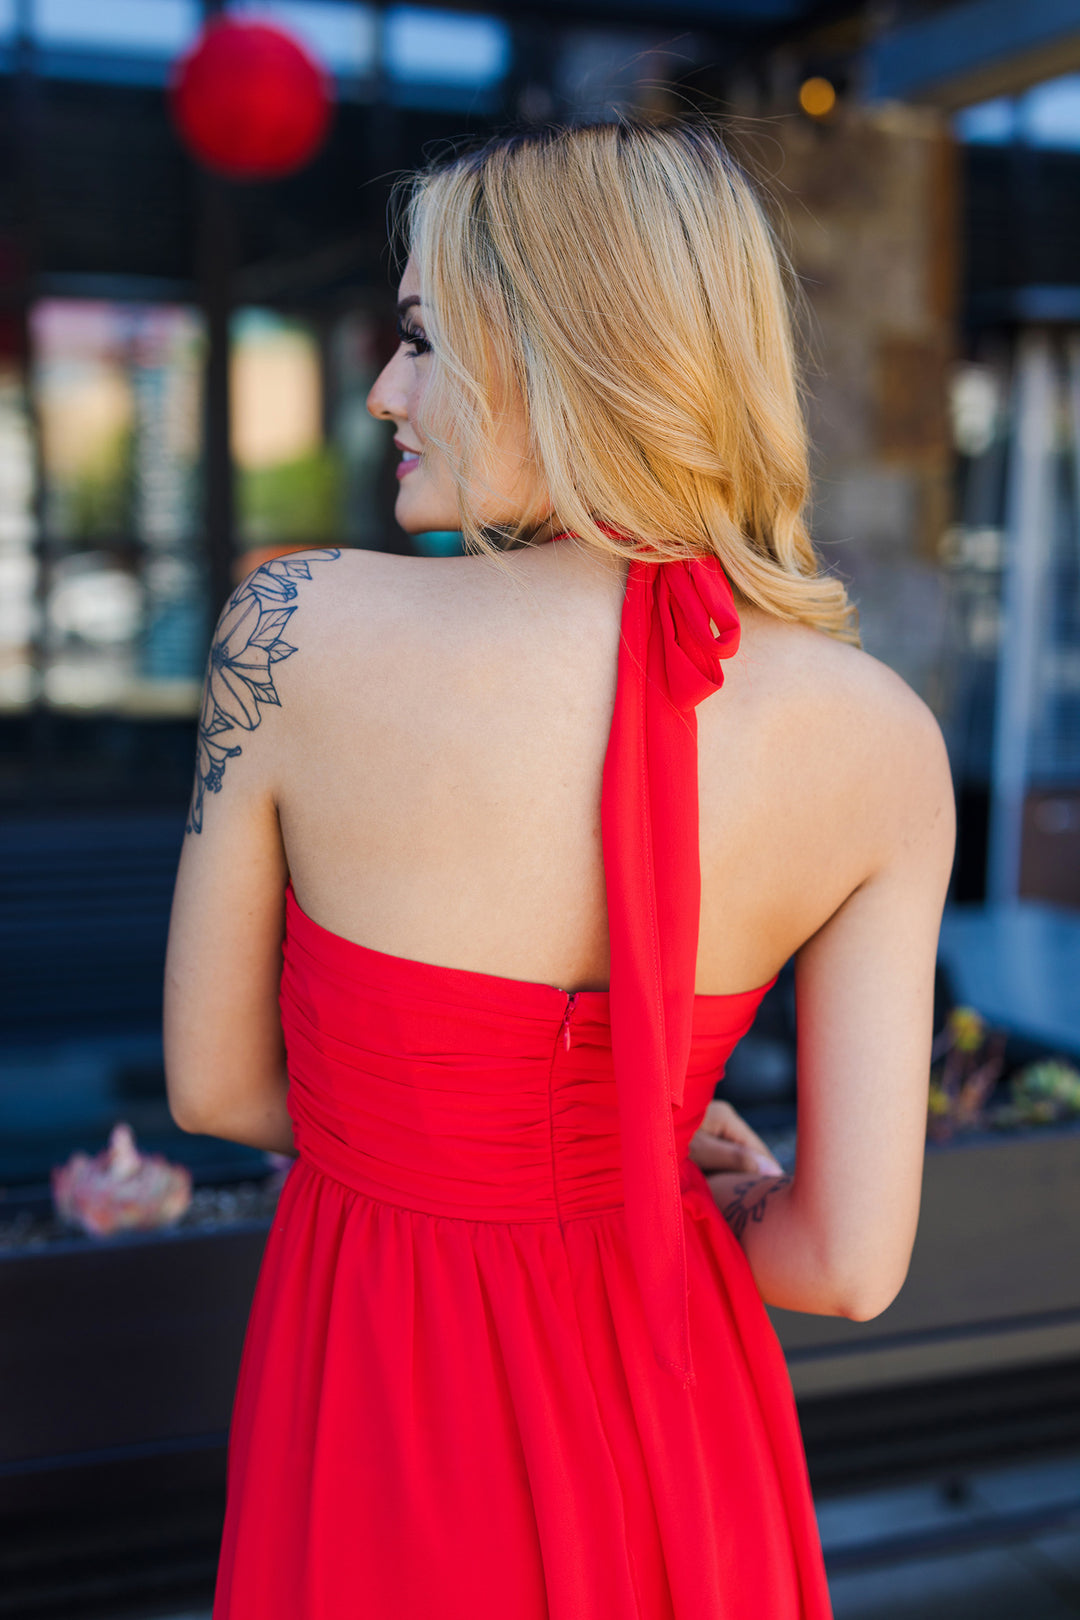 The Poppy Field Red Cut-Out Maxi Dress